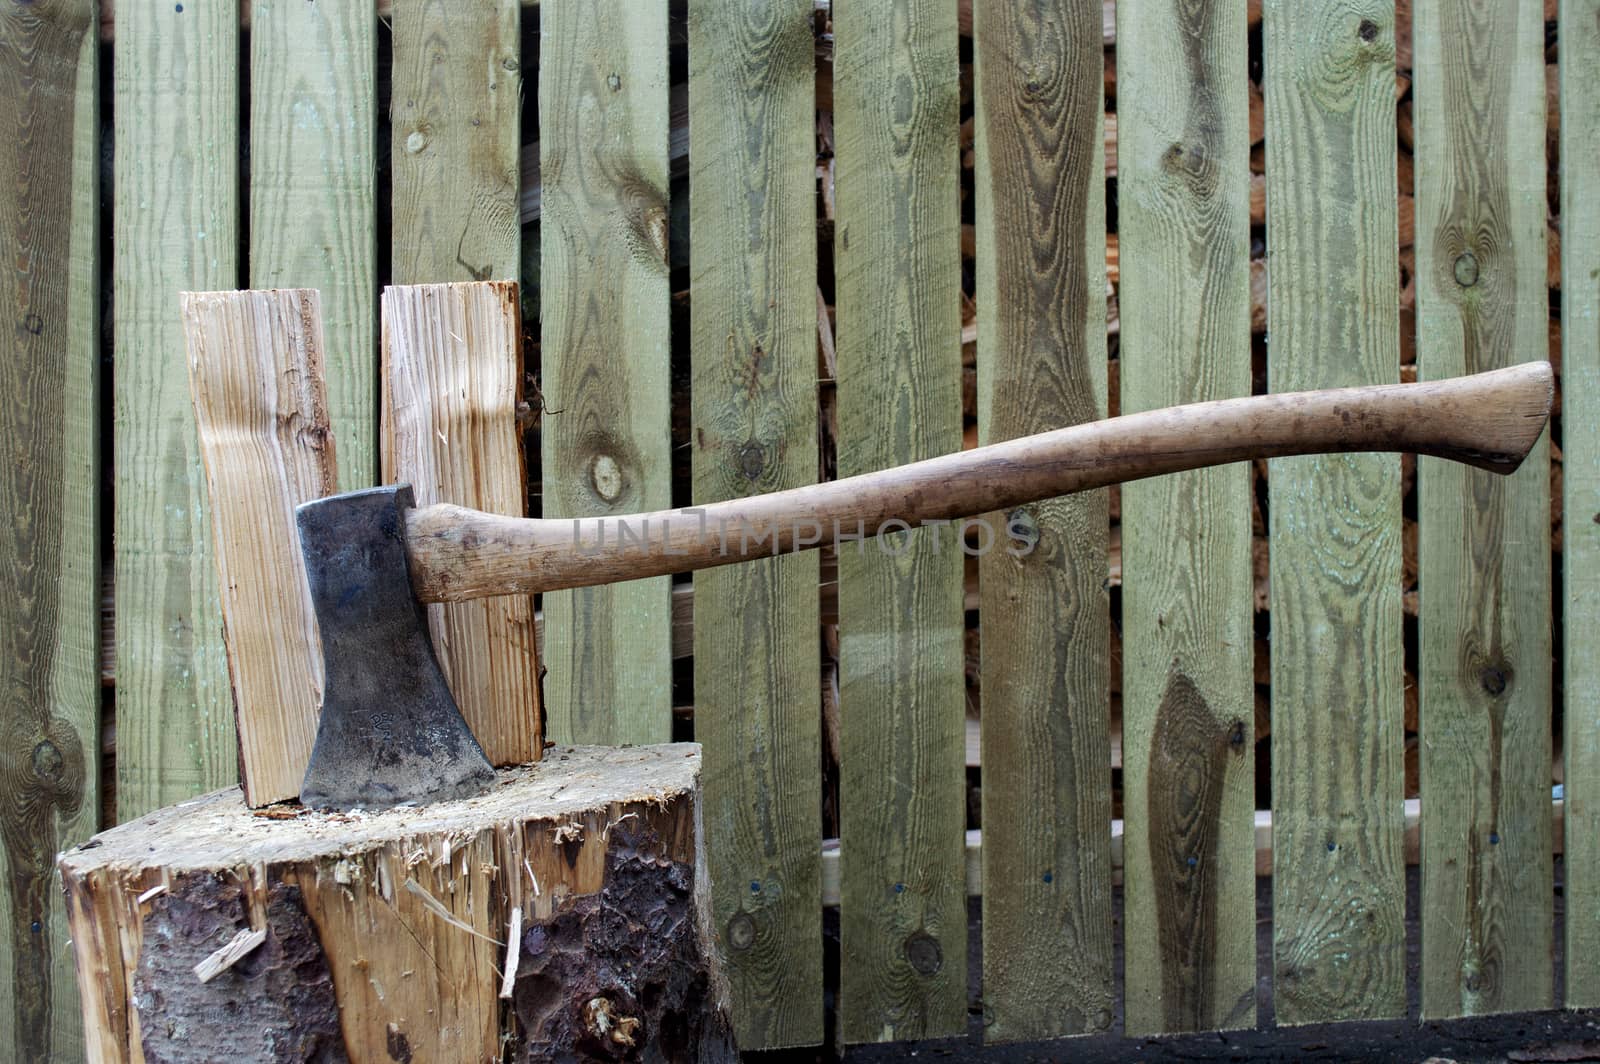 Old vintage axe stuck in wood log used to chop other wood logs.